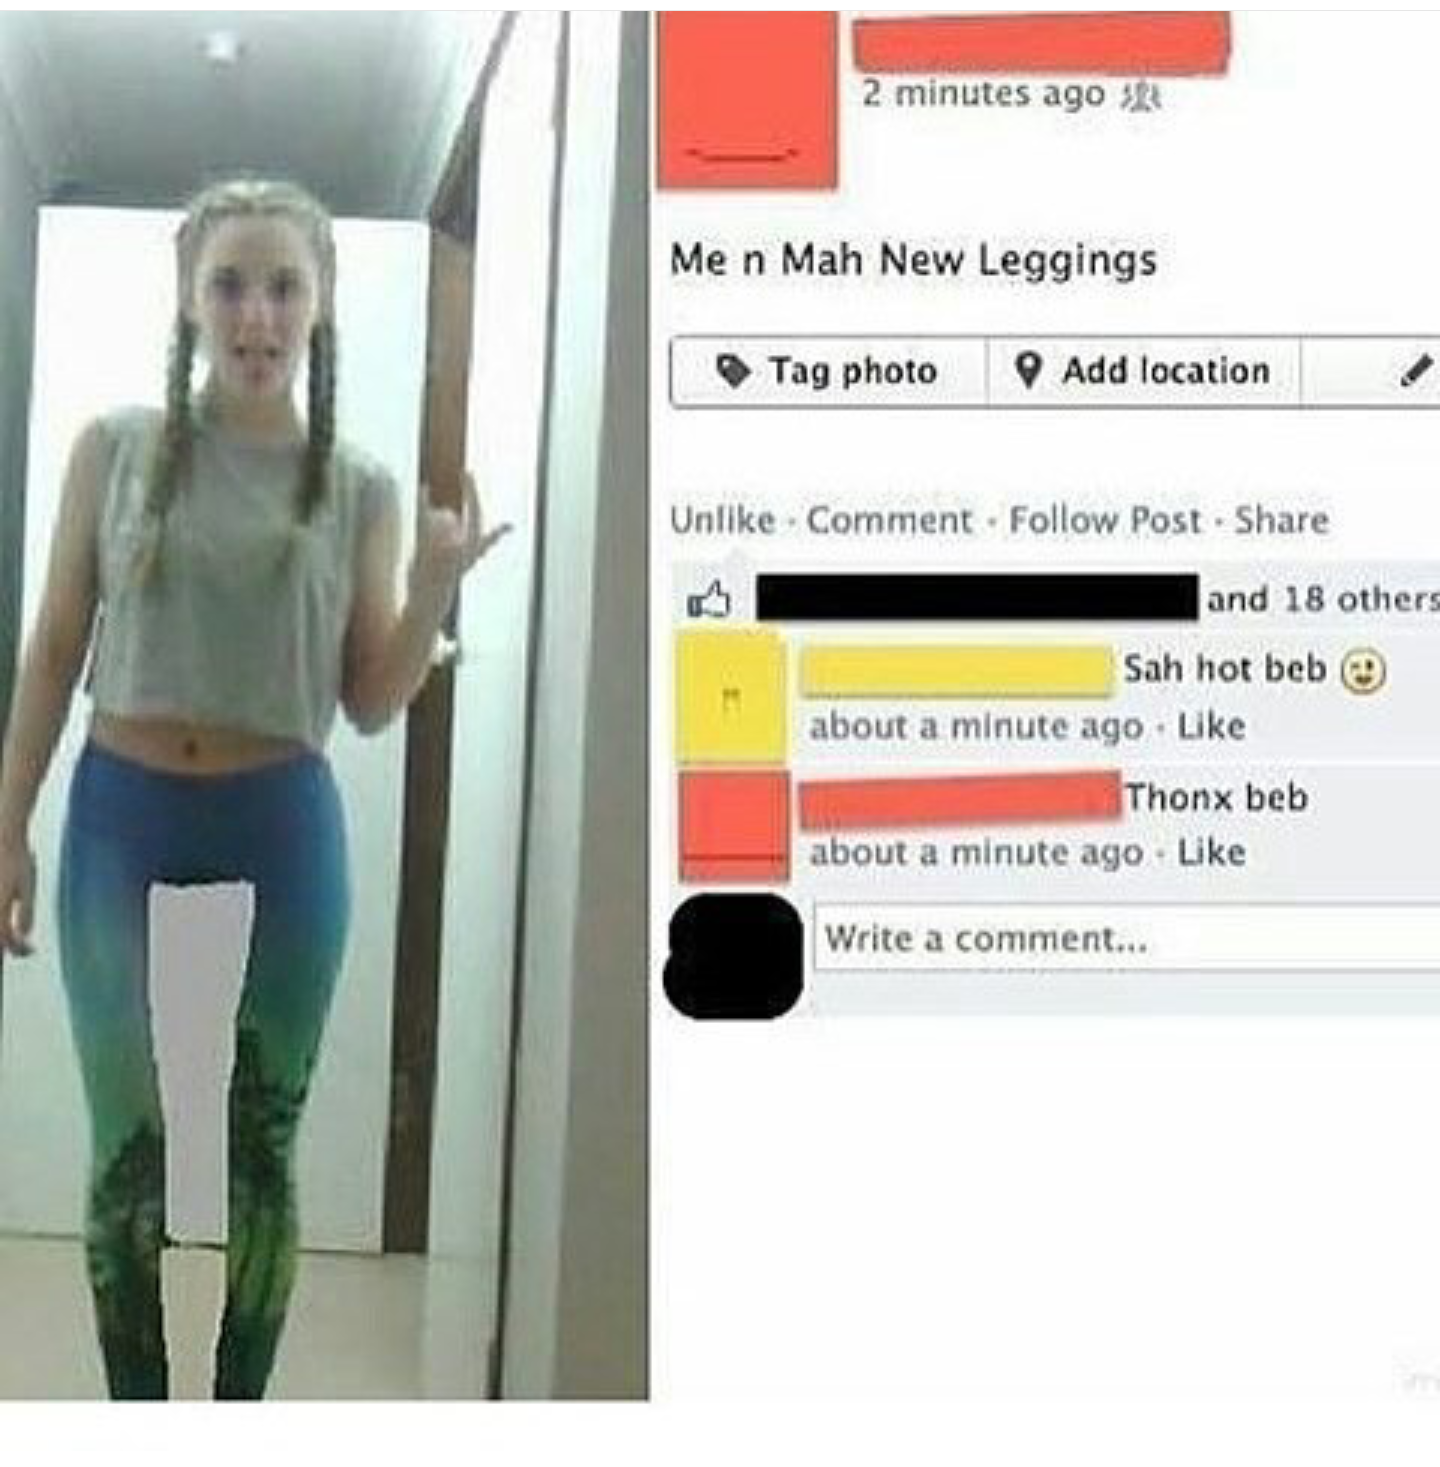 worst picture on the internet ever - 2 minutes ago Men Mah New Leggings Tag photo Add location Un Comment . Post and 18 others Sah hot bebe about a minute ago Thonx beb about a minute ago Write a comment...